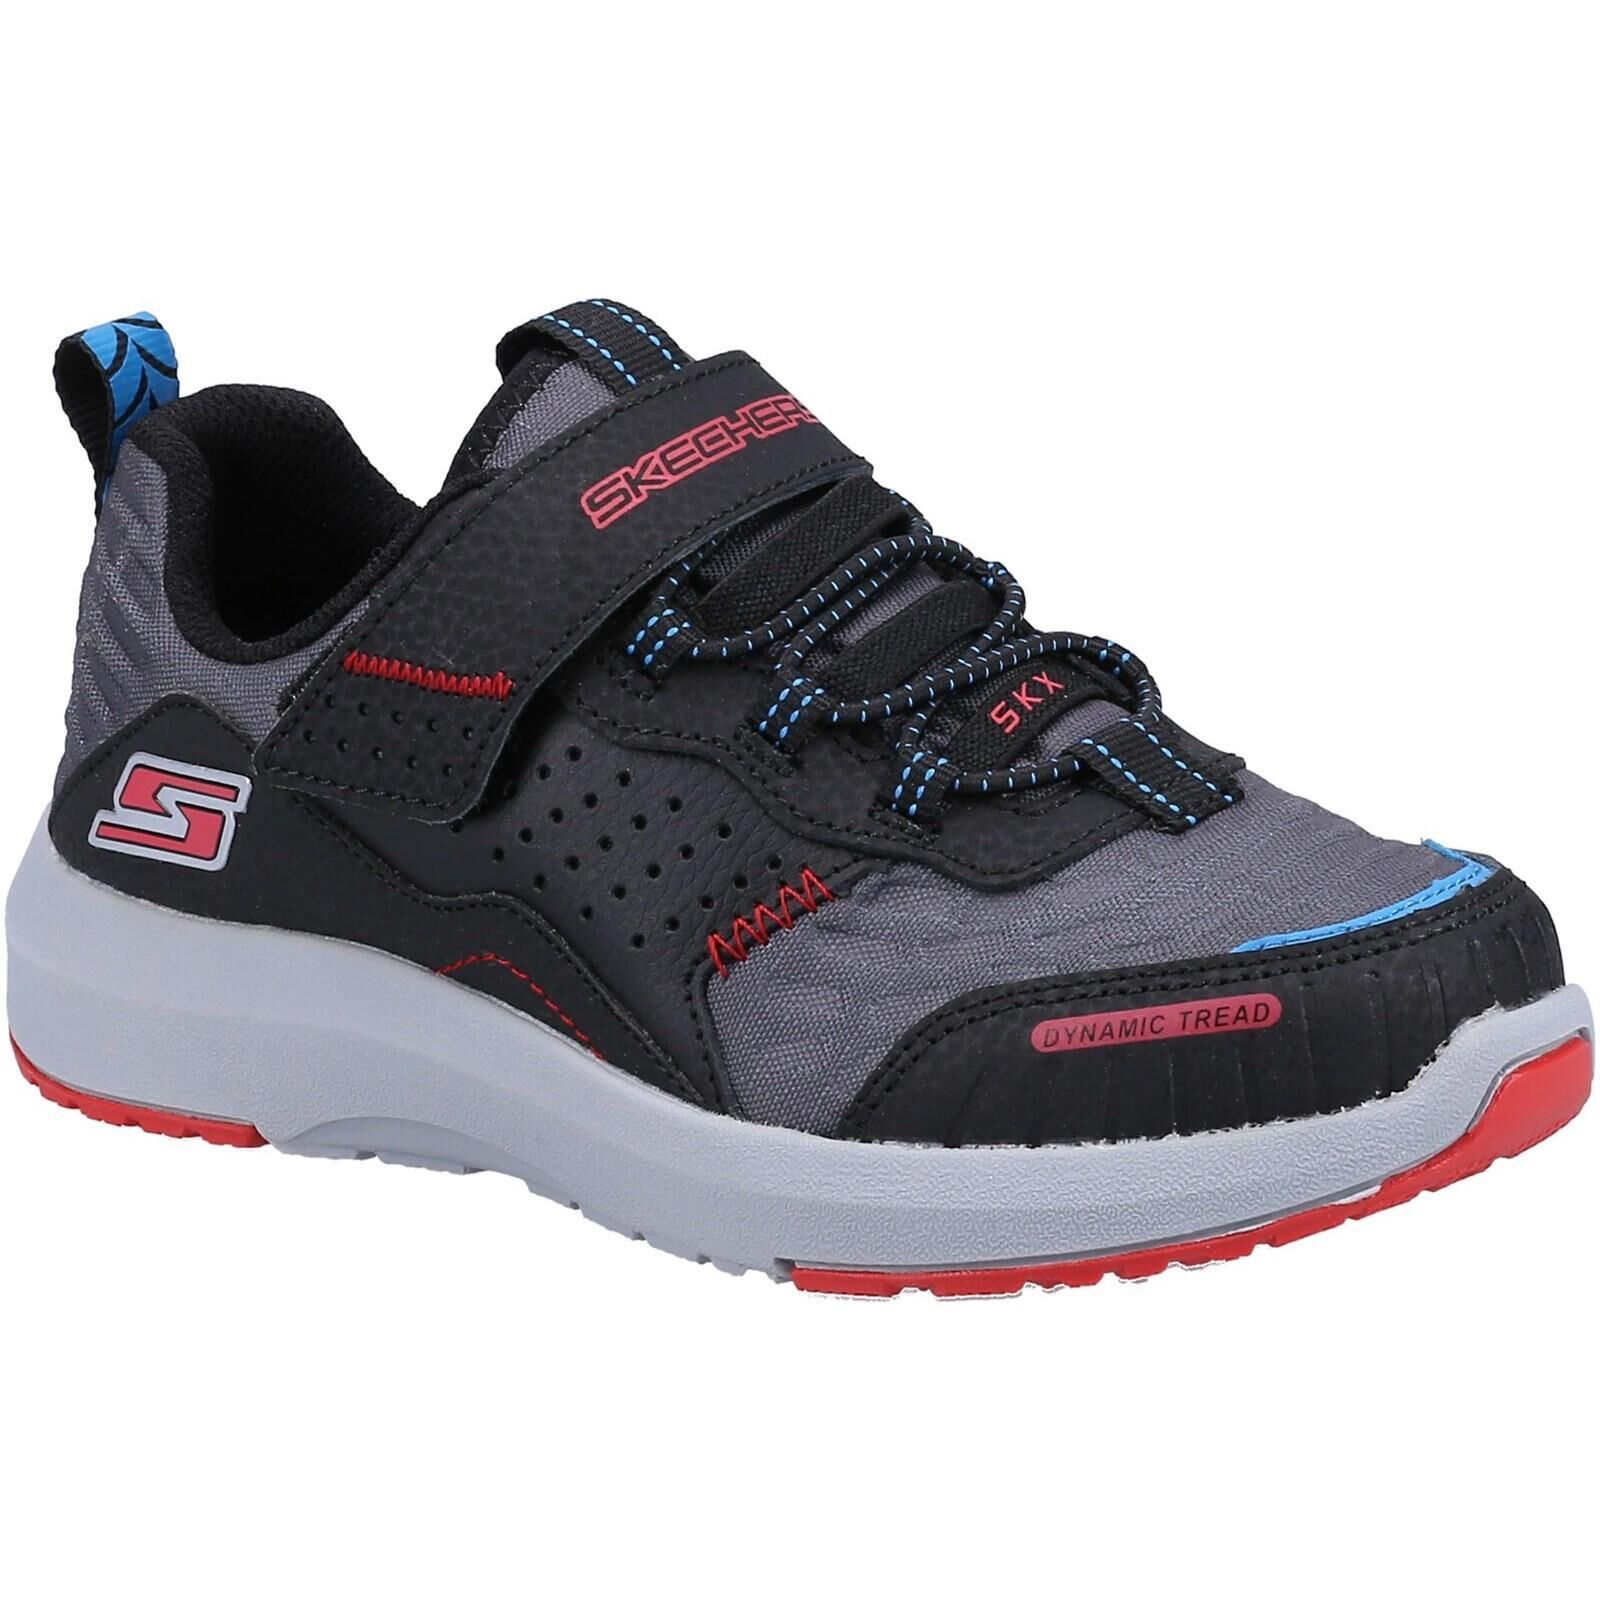 SKECHERS Boys Dynamic Tread Top Speed Leather Trainers (Black/Red)